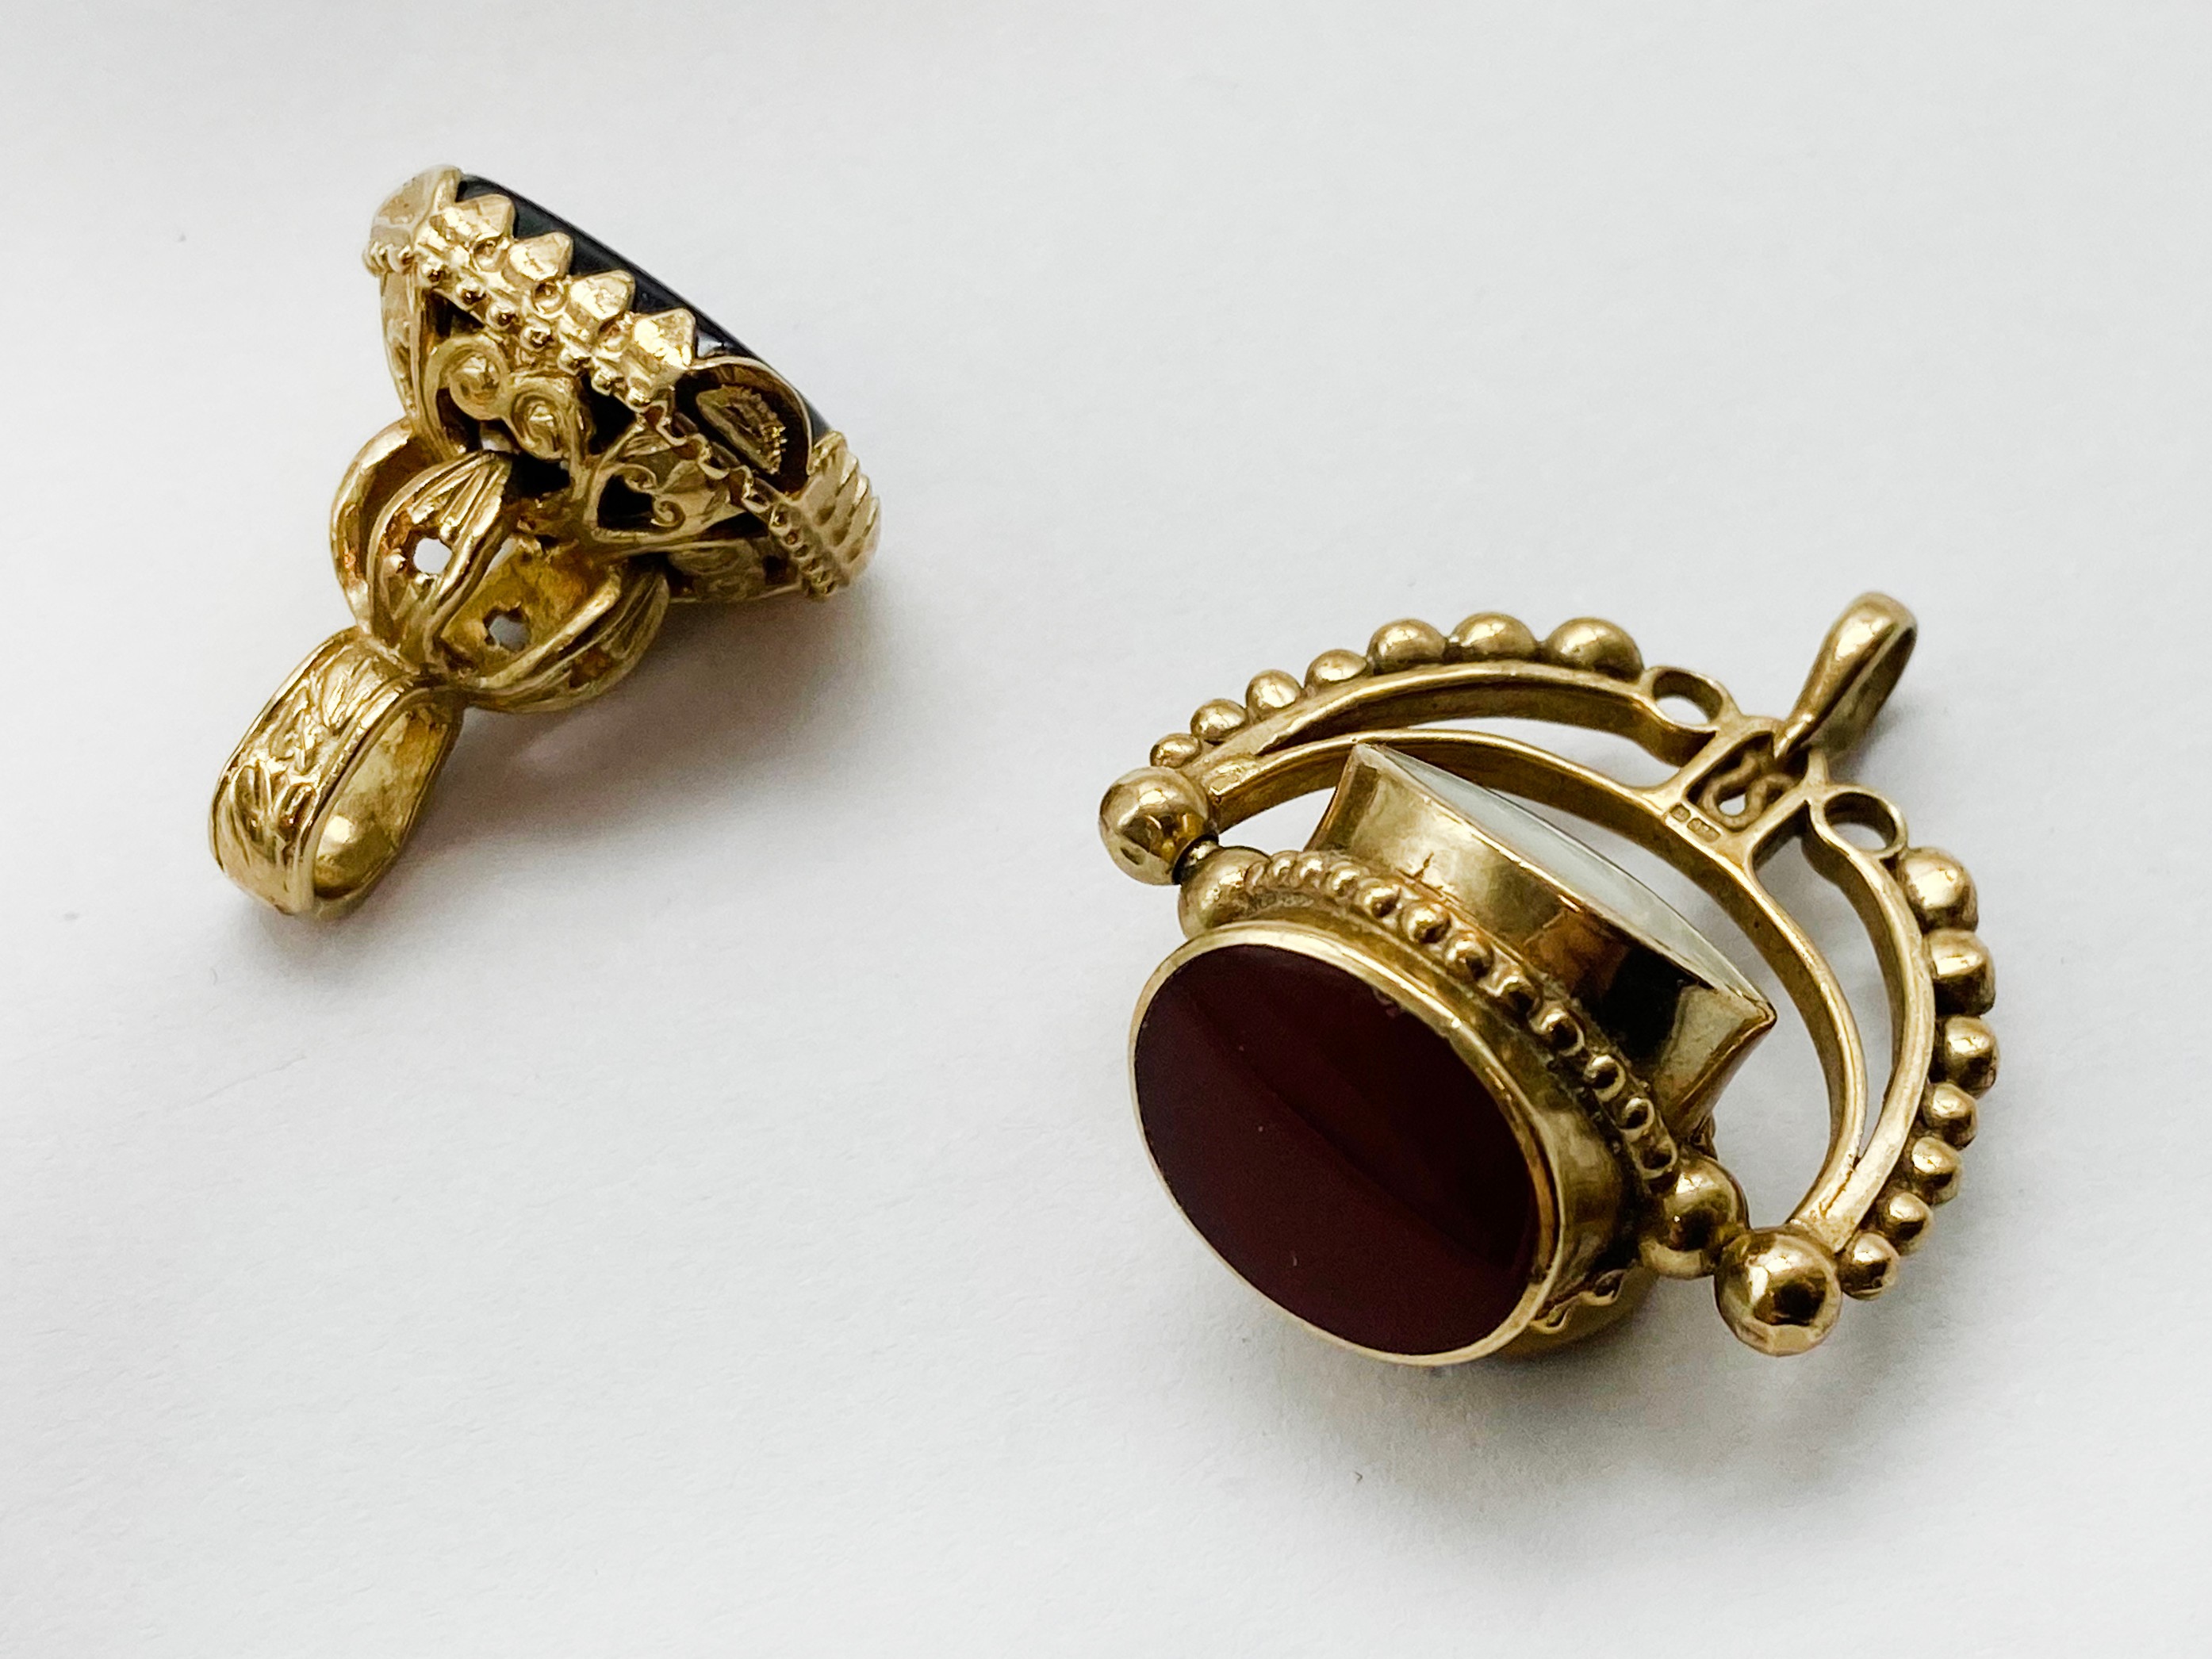 TWO 9CT GOLD FOB SEALS WITH GEMSTONES - Image 2 of 3